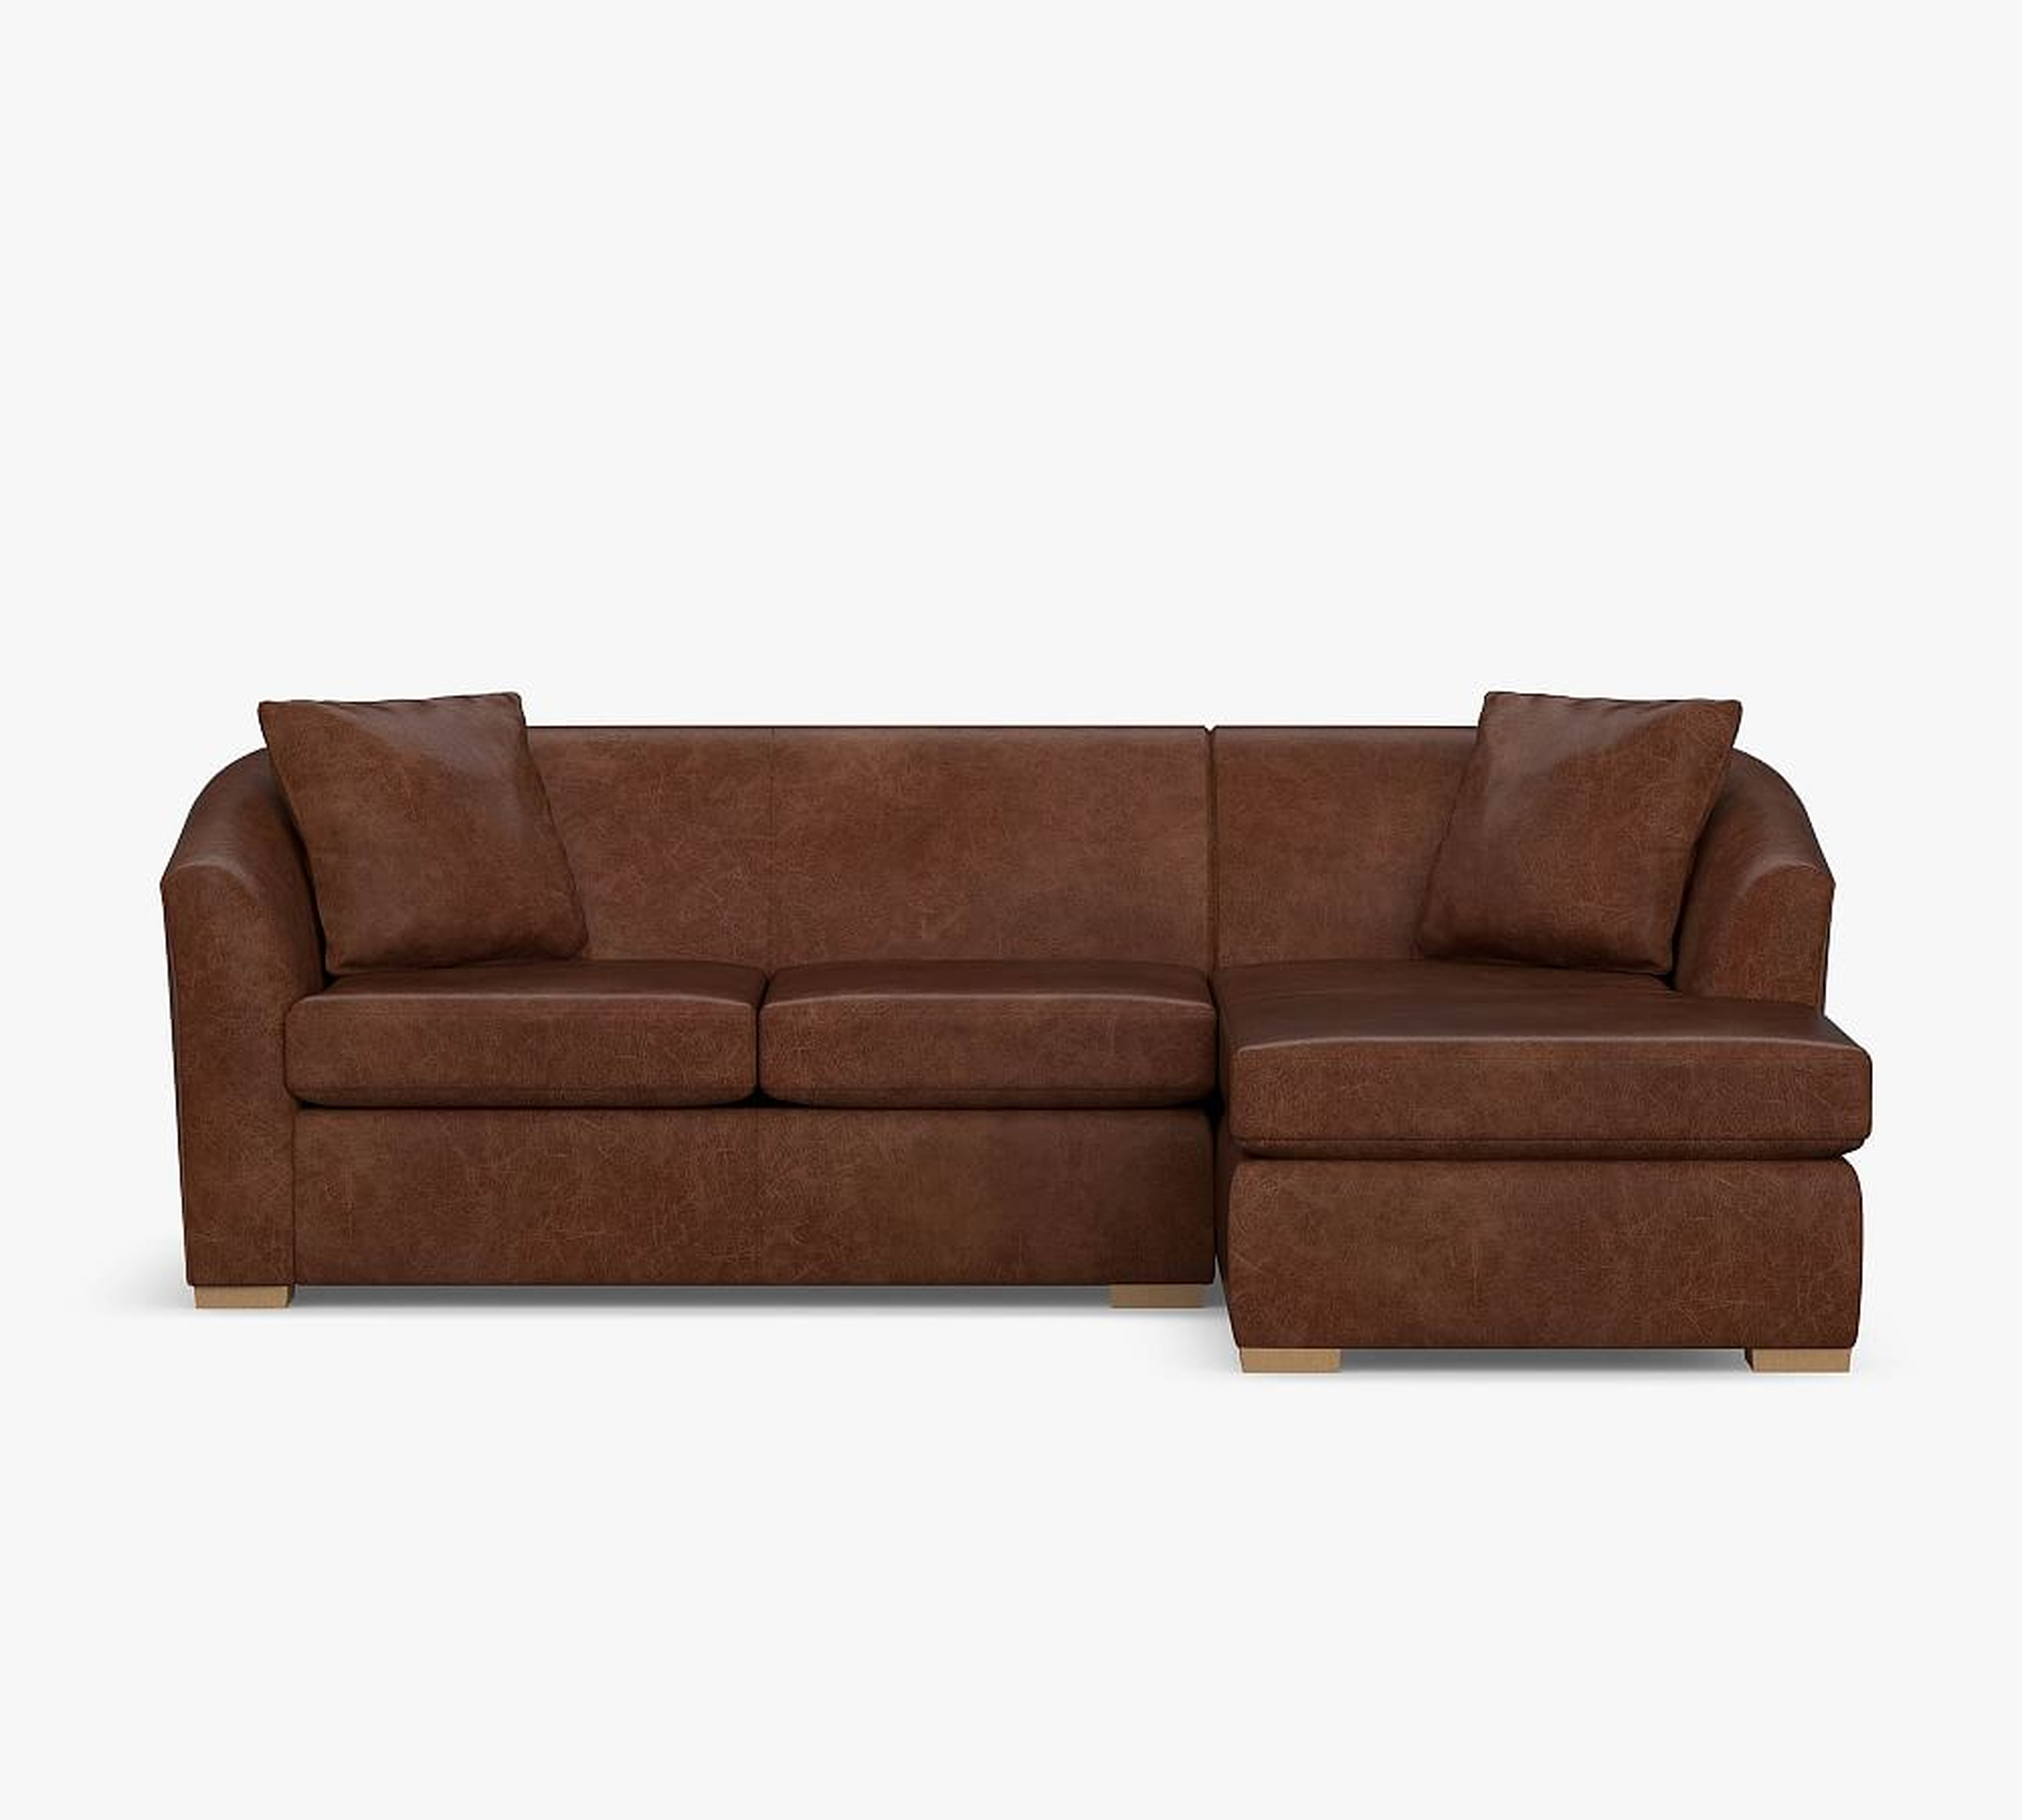 Bodega Leather Right Arm Sofa with Chaise Sectional, Polyester Wrapped Cushions, Vintage Camel - Pottery Barn